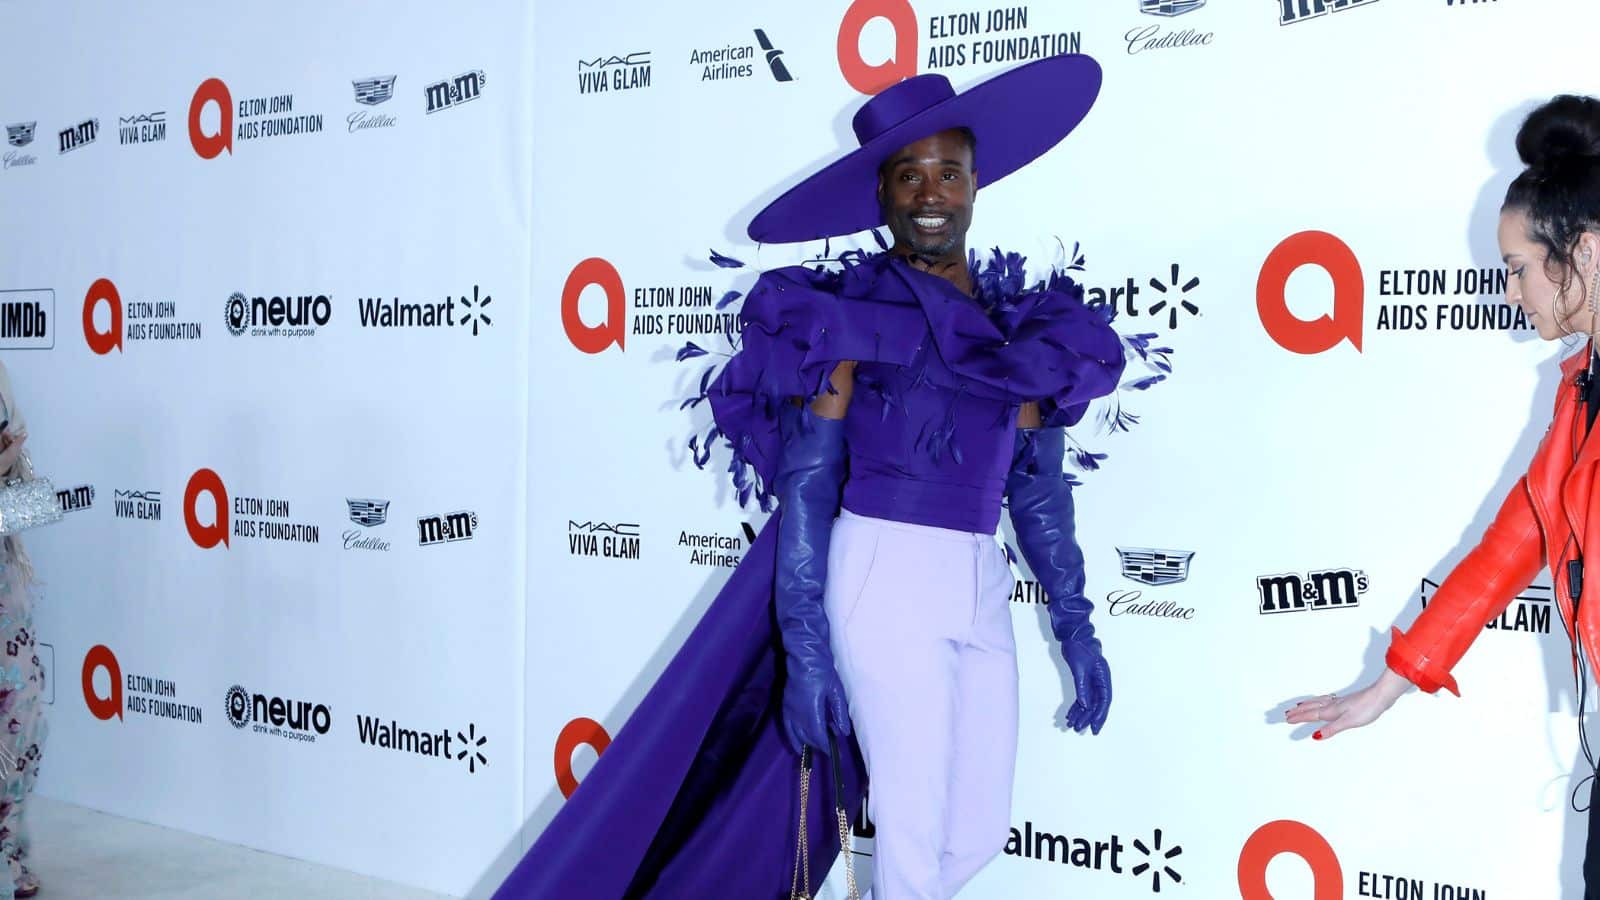 LOS ANGELES - FEB 9: Billy Porter at the 28th Elton John Aids Foundation Viewing Party at the West Hollywood Park on February 9, 2020 in West Hollywood, CA